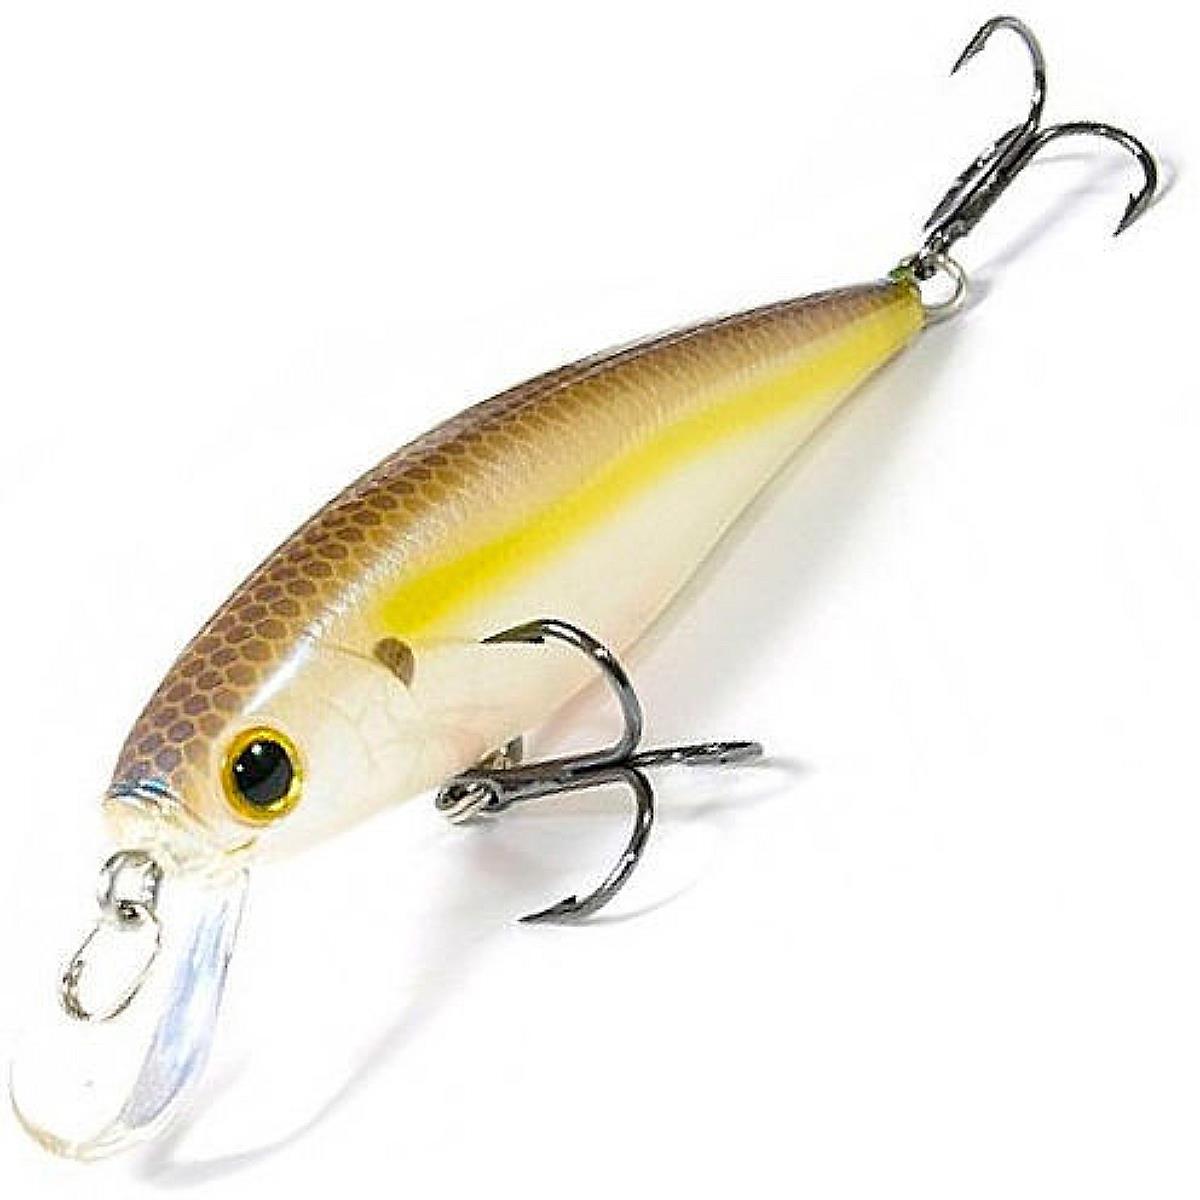 Воблер Pointer 78-250 Chartreuse Shad Lucky Craft воблер pointer 100dd 180 flake flake golden sun fish lucky craft